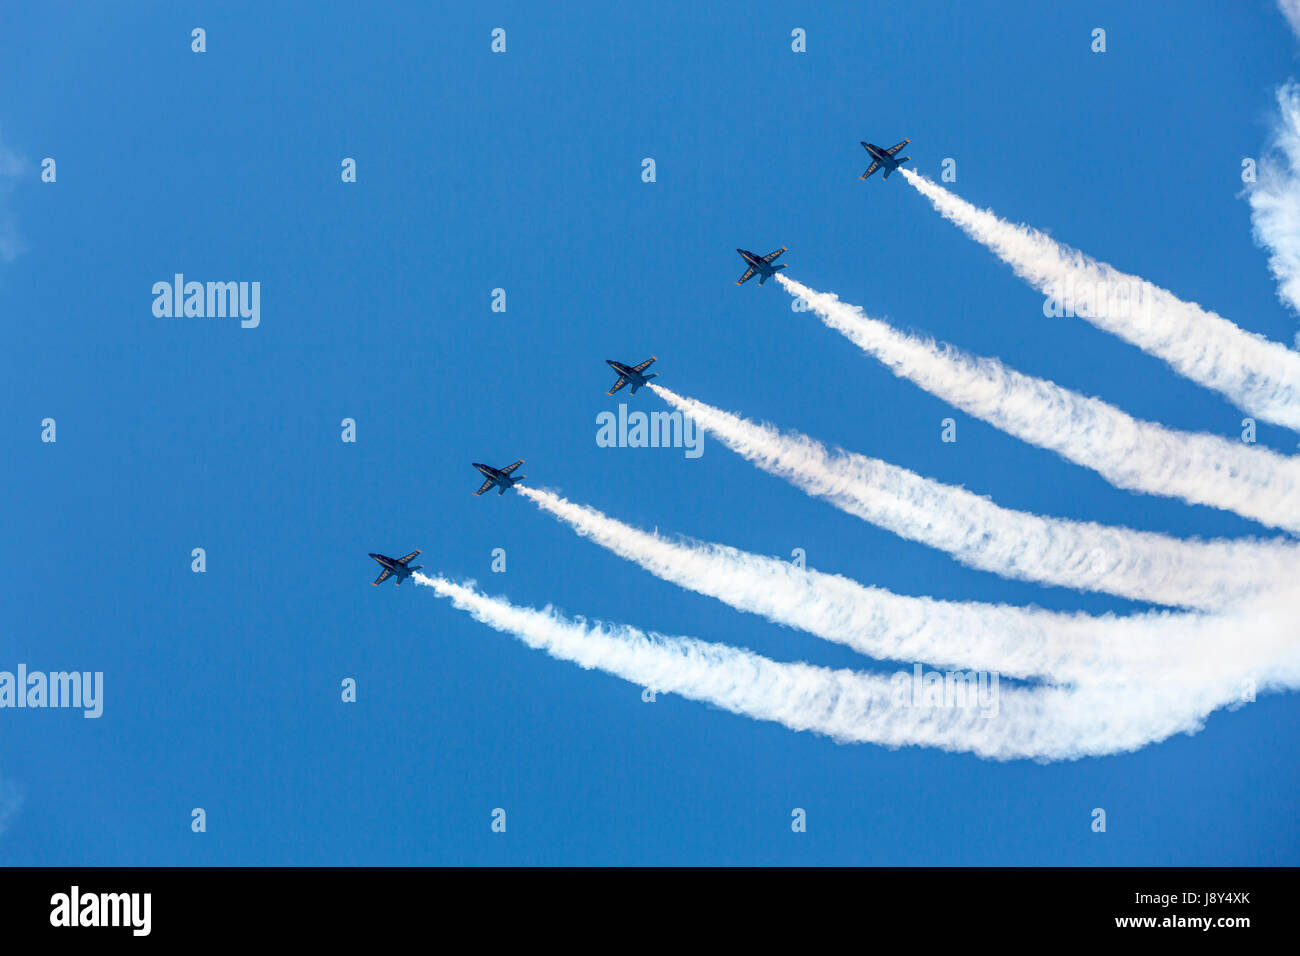 The US Navy Blue Angels, air acrobatic team at the Air National Guard Airshow in Sioux Falls, South Dakota, USA. Stock Photo